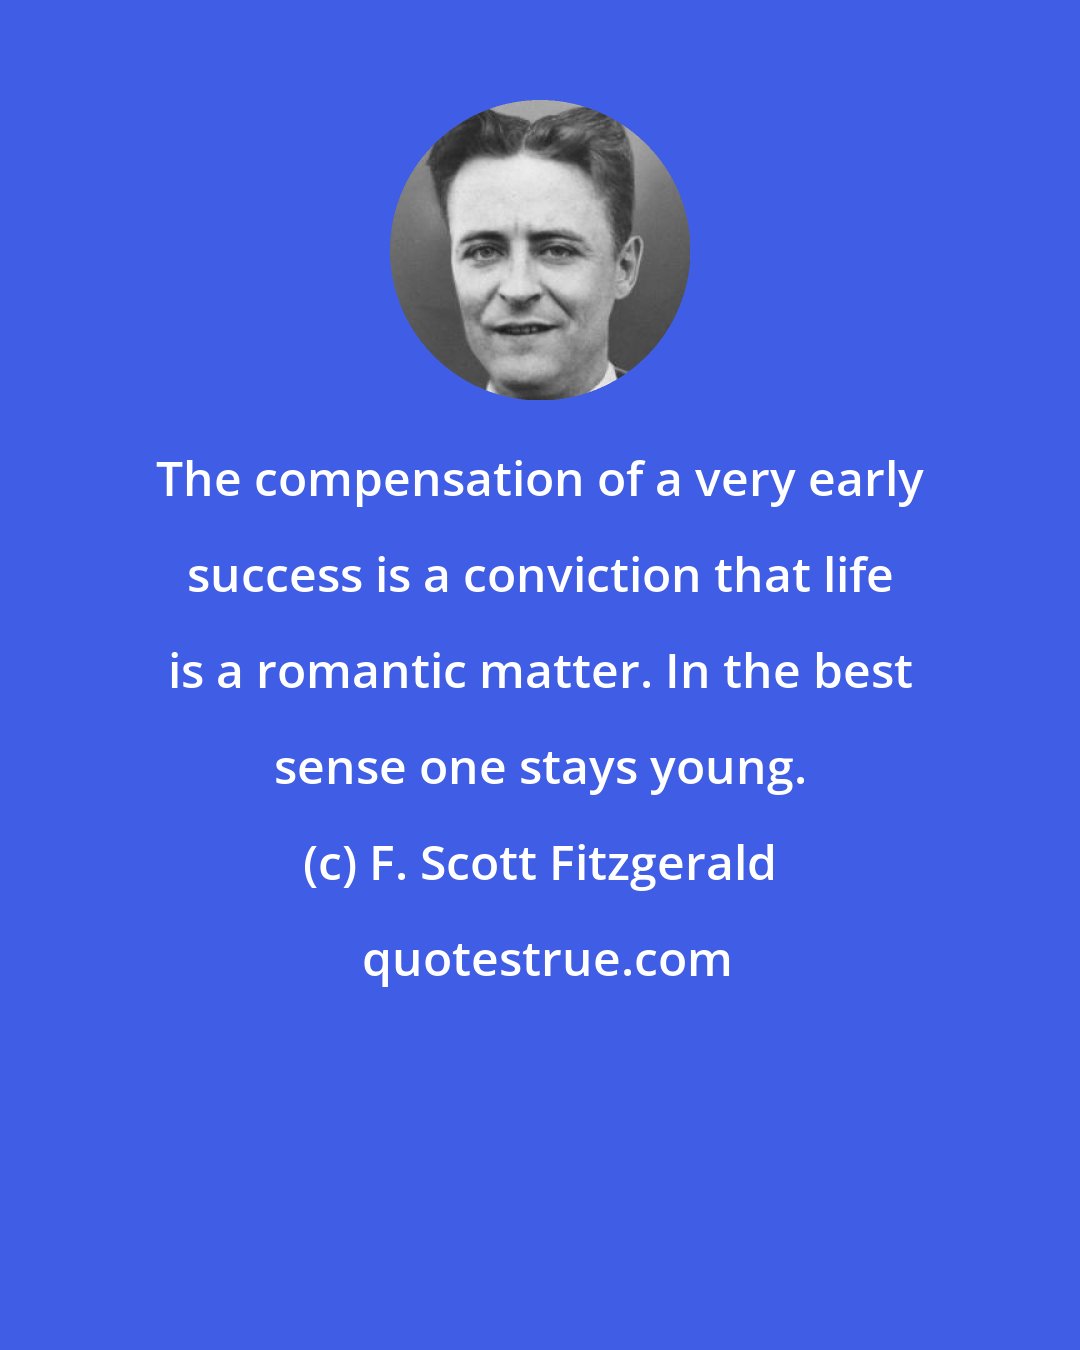 F. Scott Fitzgerald: The compensation of a very early success is a conviction that life is a romantic matter. In the best sense one stays young.